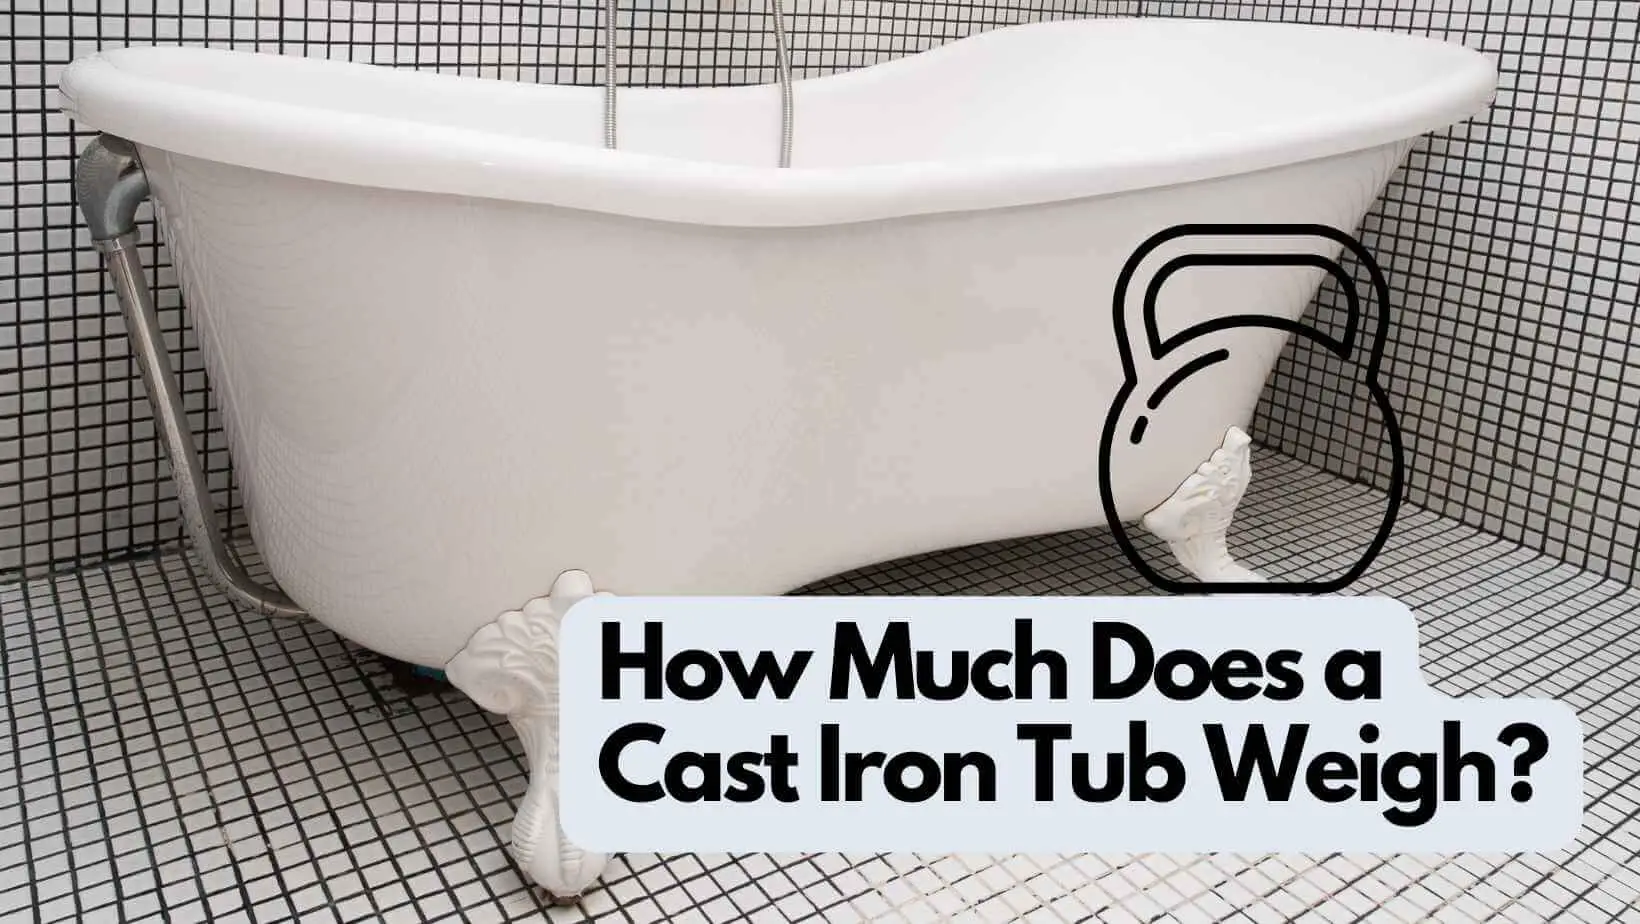 How Much Does a Cast Iron Tub Weigh